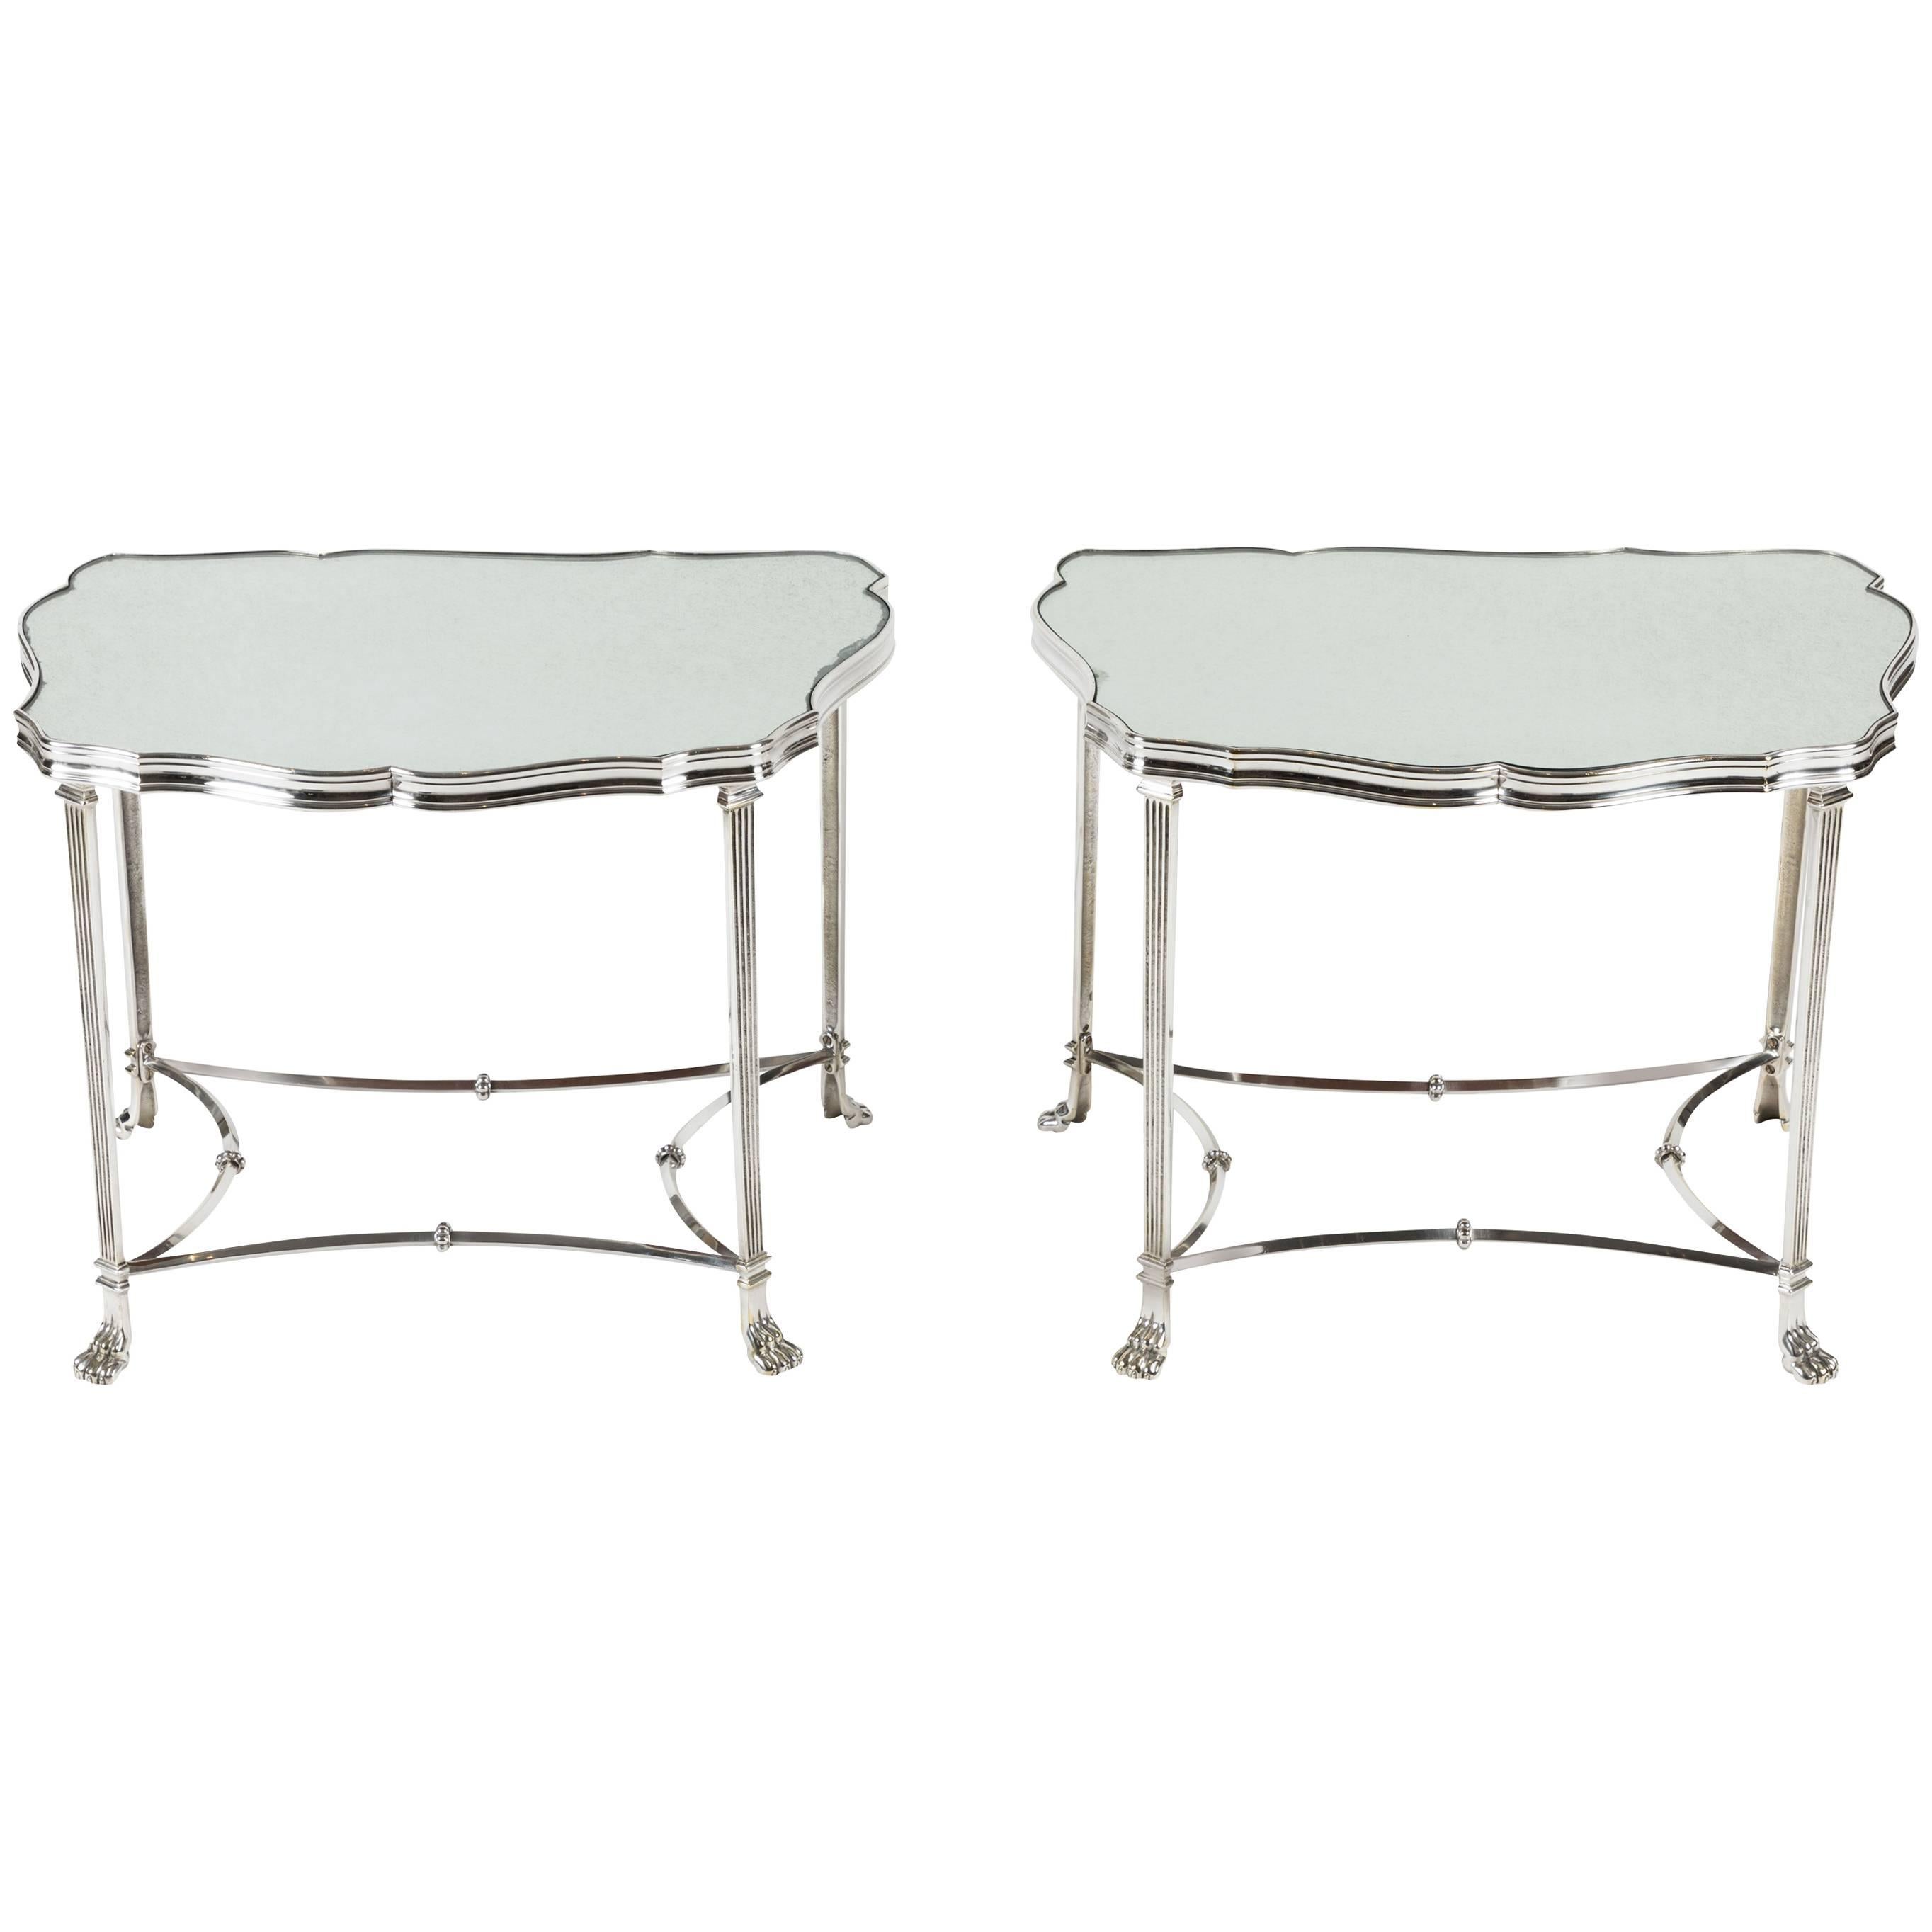 Pair of French Silver Plate and Mirrored-Top Side Tables